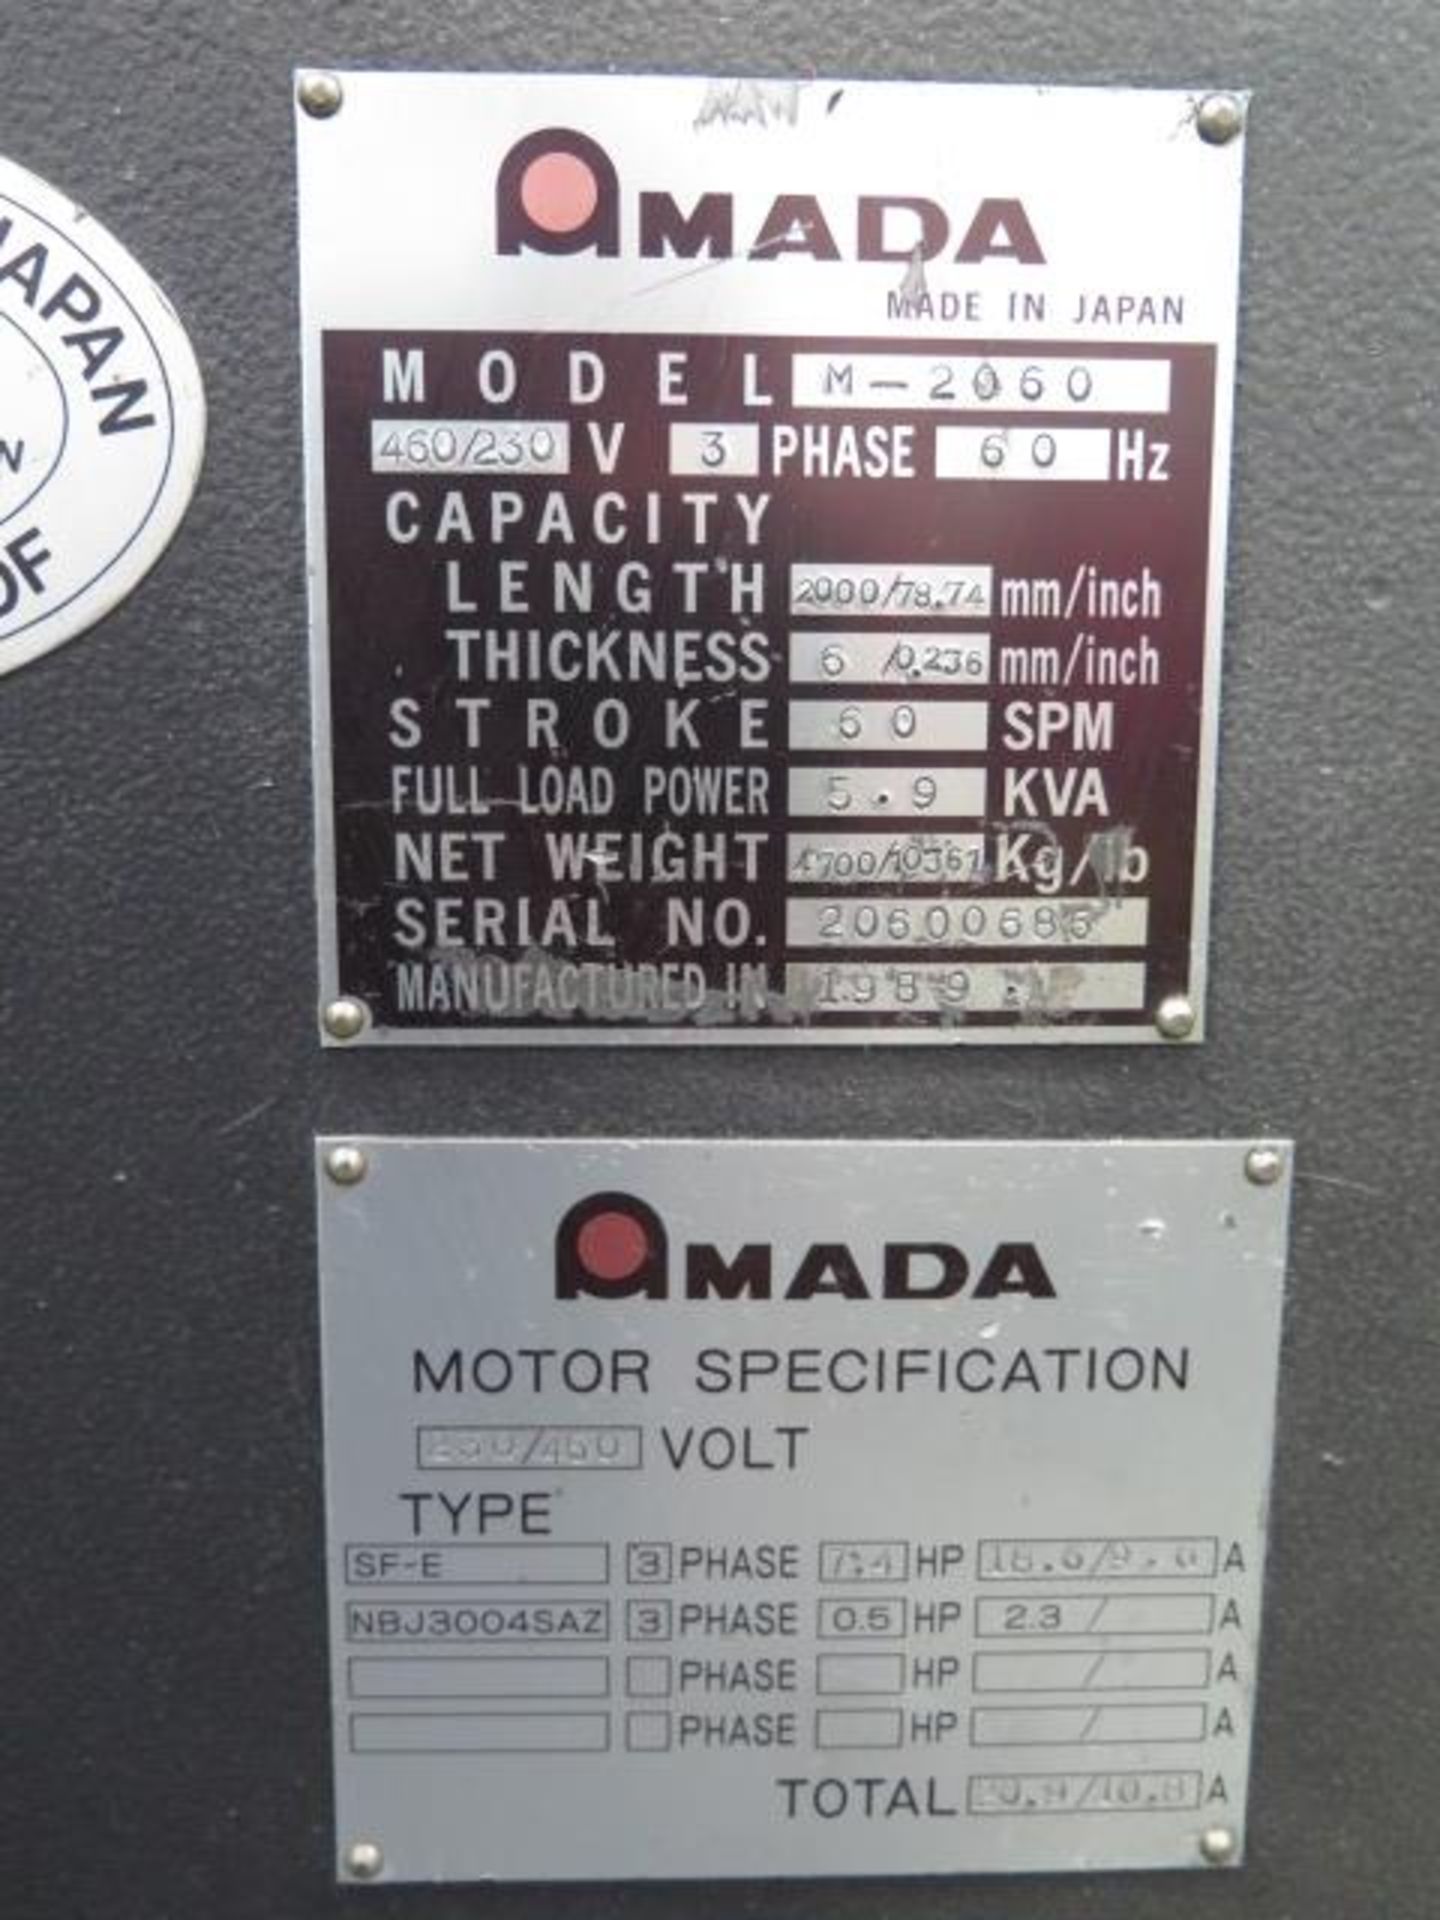 Amada M-2060 ¼” x 78” Power Shear s/n 20600686 w/ Amada Controls and Back Gauging, SOLD AS IS - Image 14 of 14